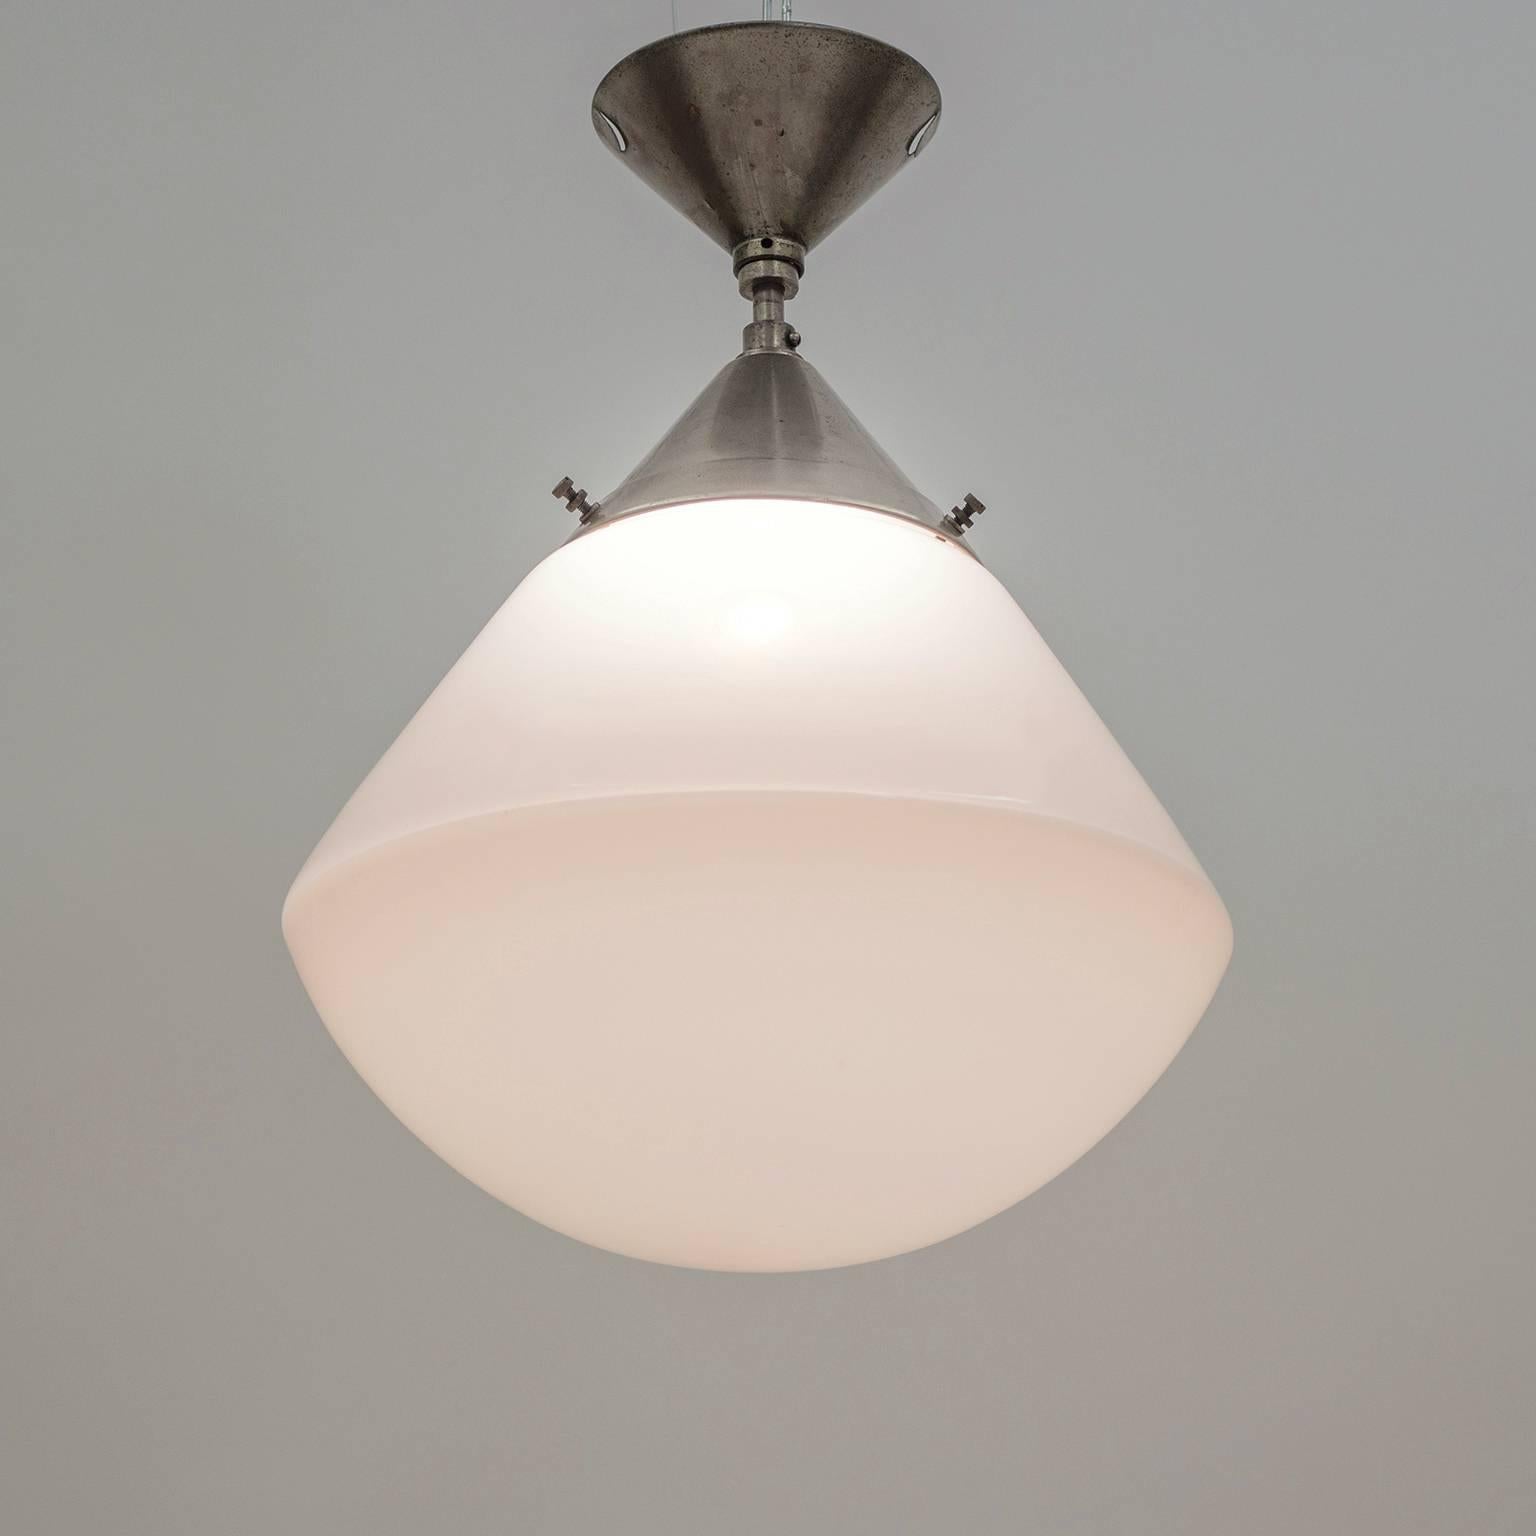 Rare Large Nickel and Glass Kandem Ceiling Light, 1930s 1